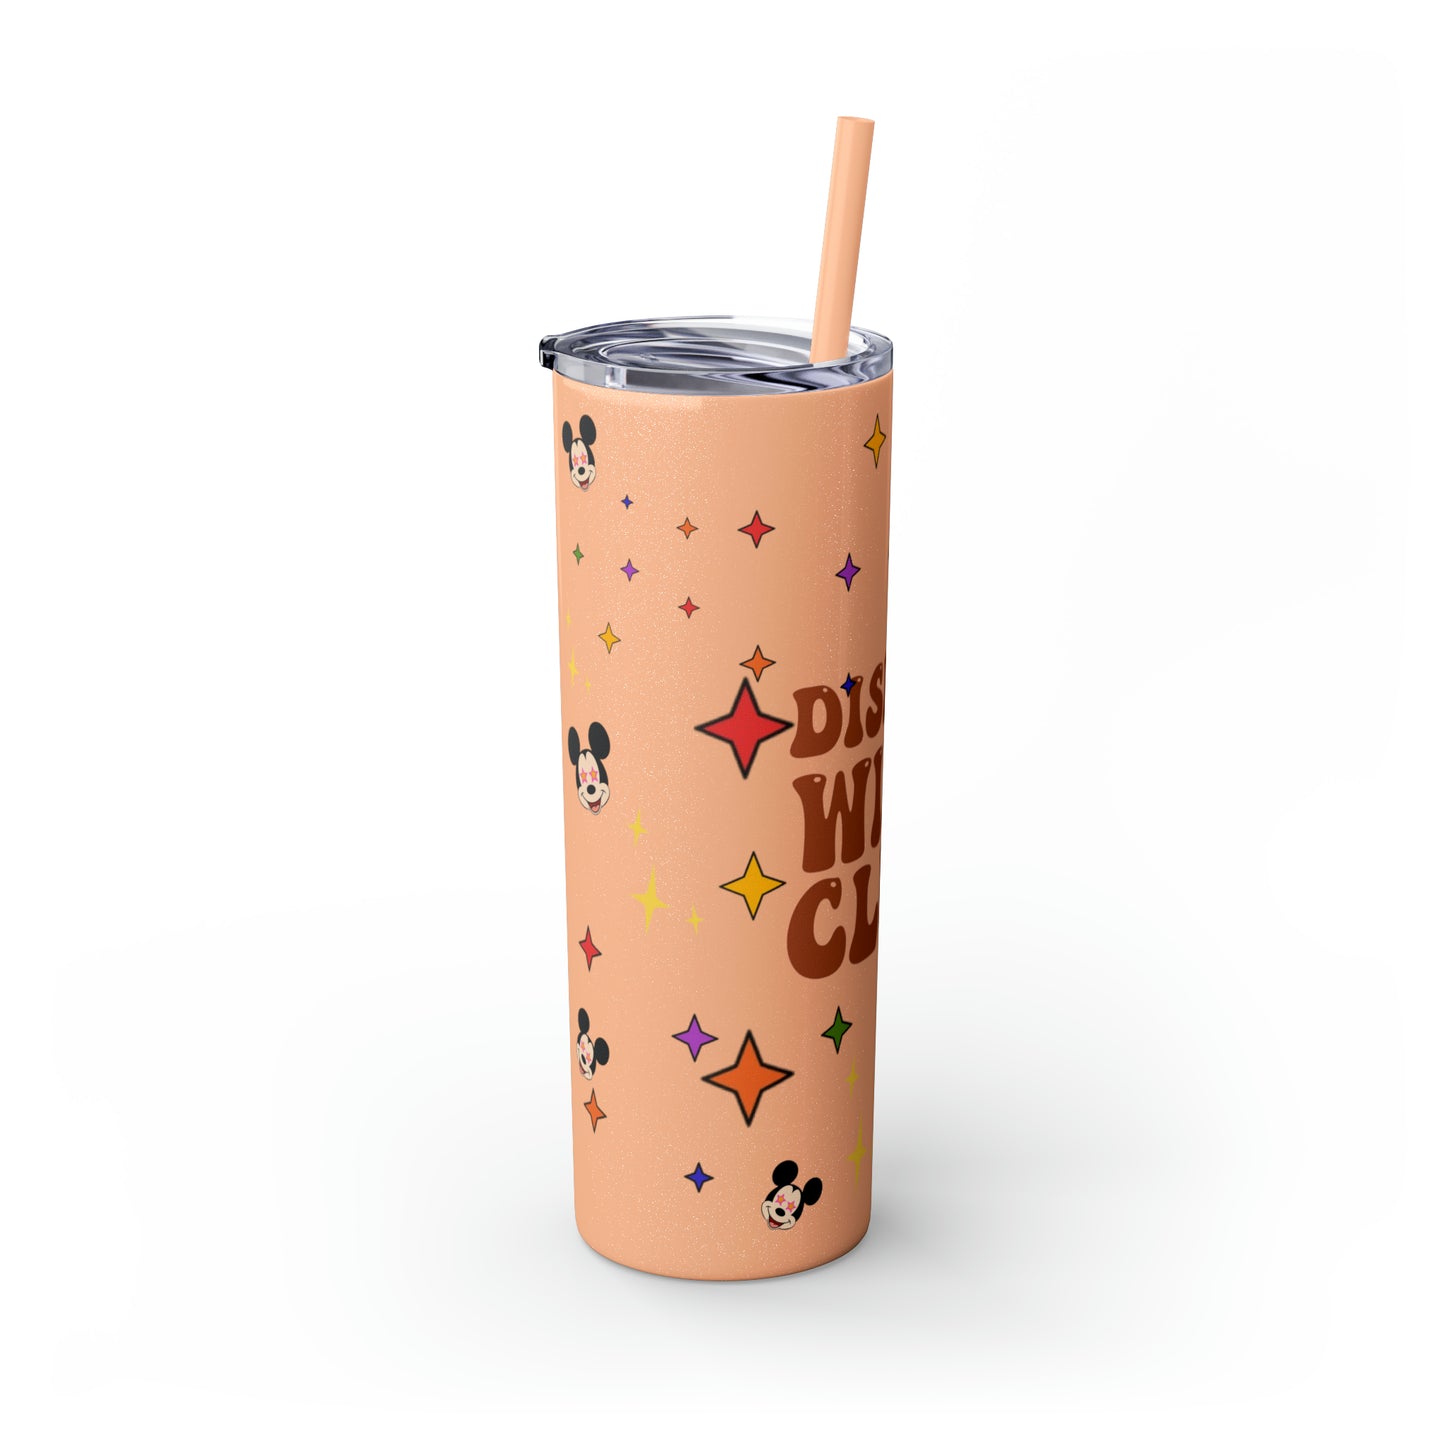 Load image into Gallery viewer, Disney Wife Club Skinny Tumbler with Straw, 20oz
